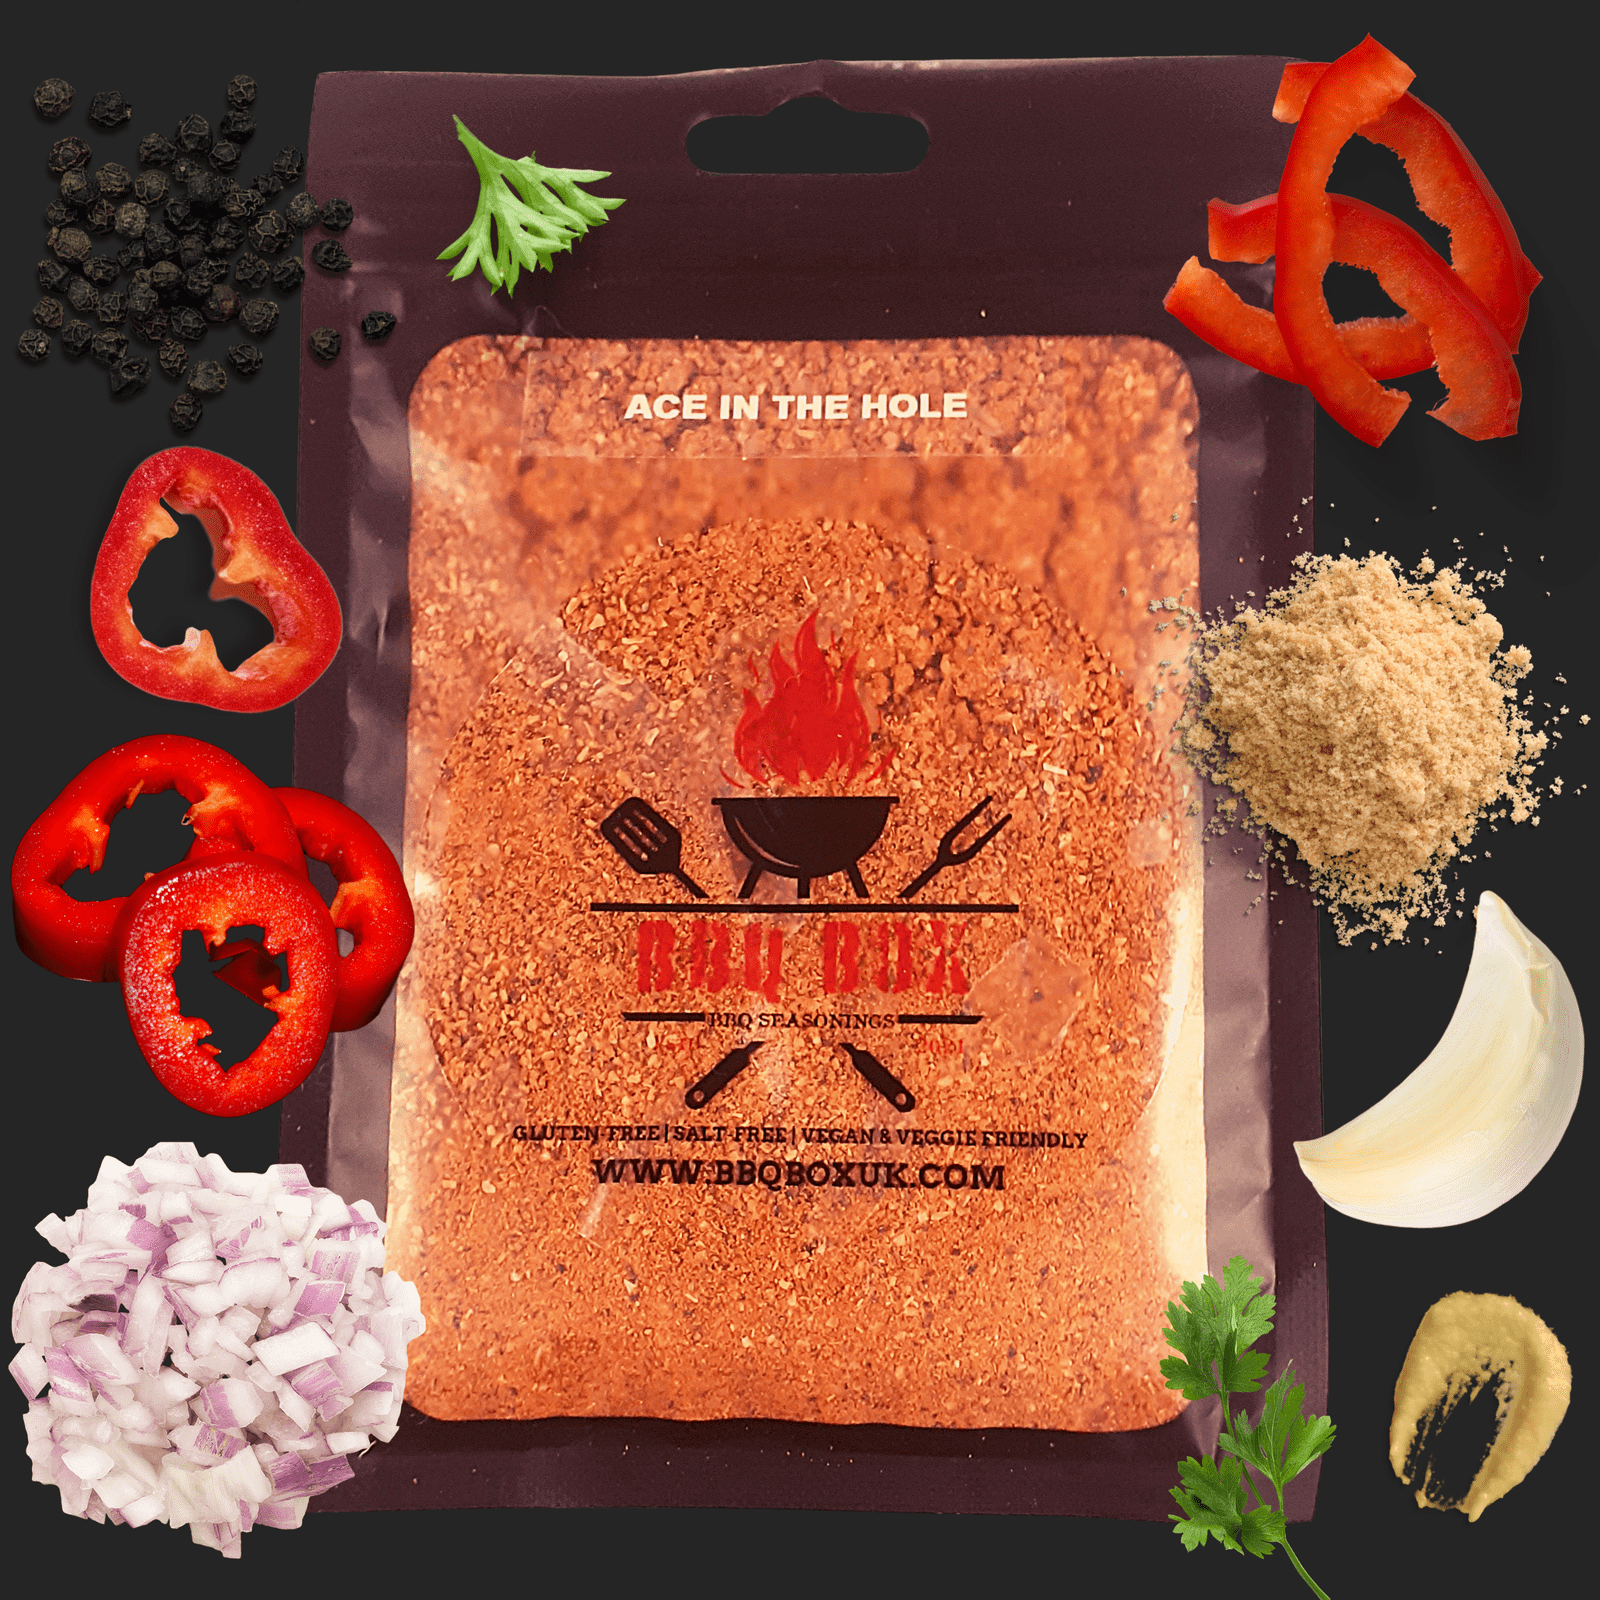 BBQ BOX UK - ACE IN THE HOLE SEASONING - SPICY HOT BARBECUE RUB 